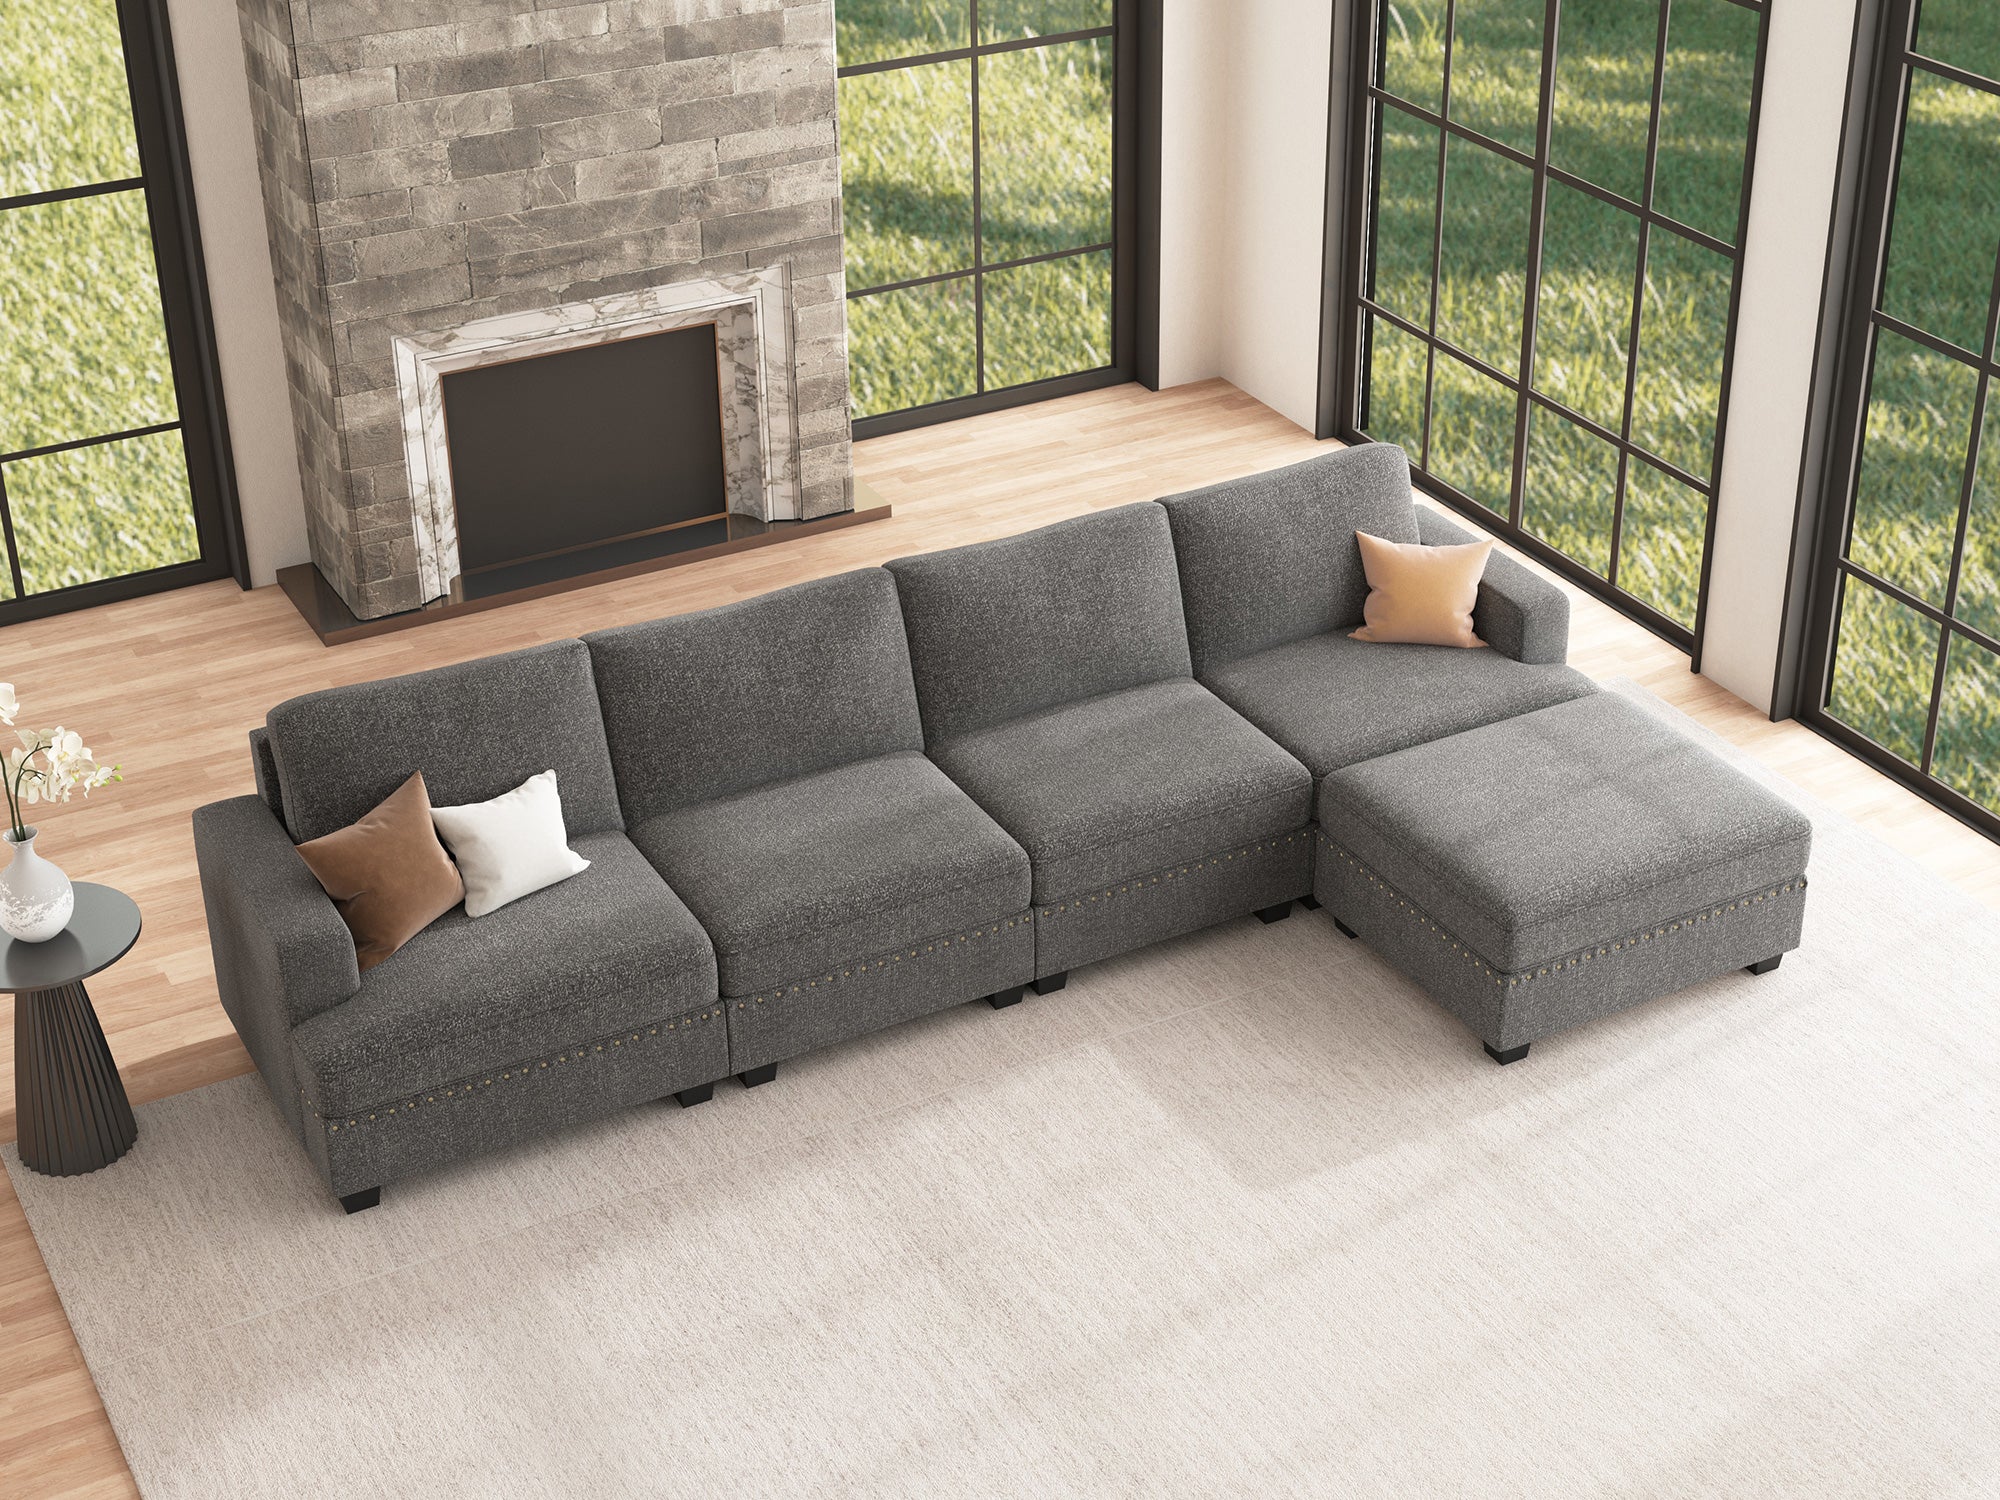 NOLANY 4-Seat L Shaped Corner Modular Sofa Storage Sectional Couch with Storage Reversible Ottoman #Color_Light Grey